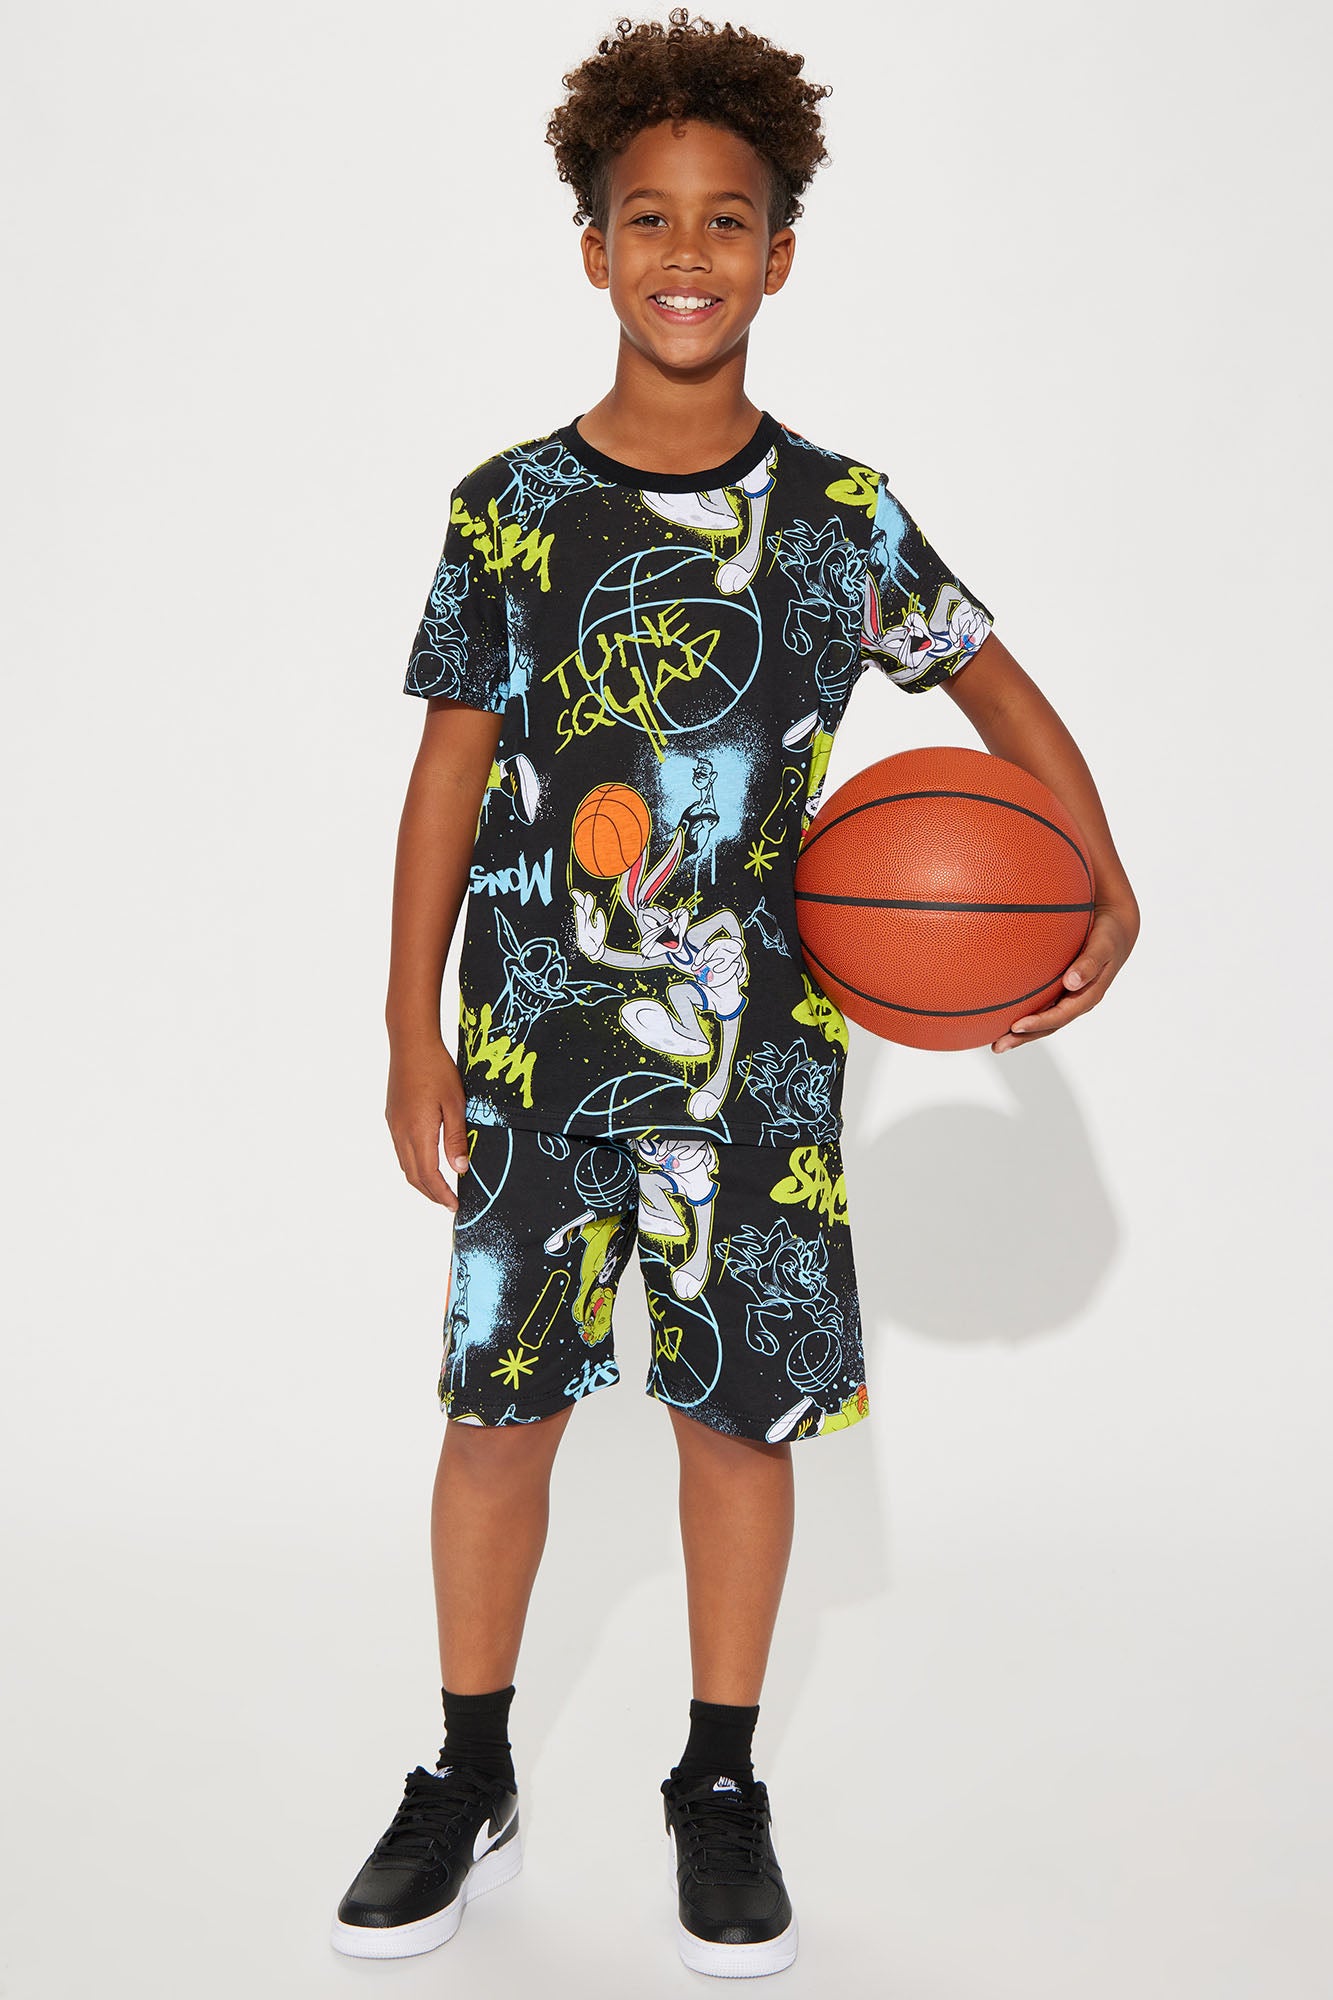 Boys Girls Space Jam 2 Jersey Clothes Tune Squad Basketball